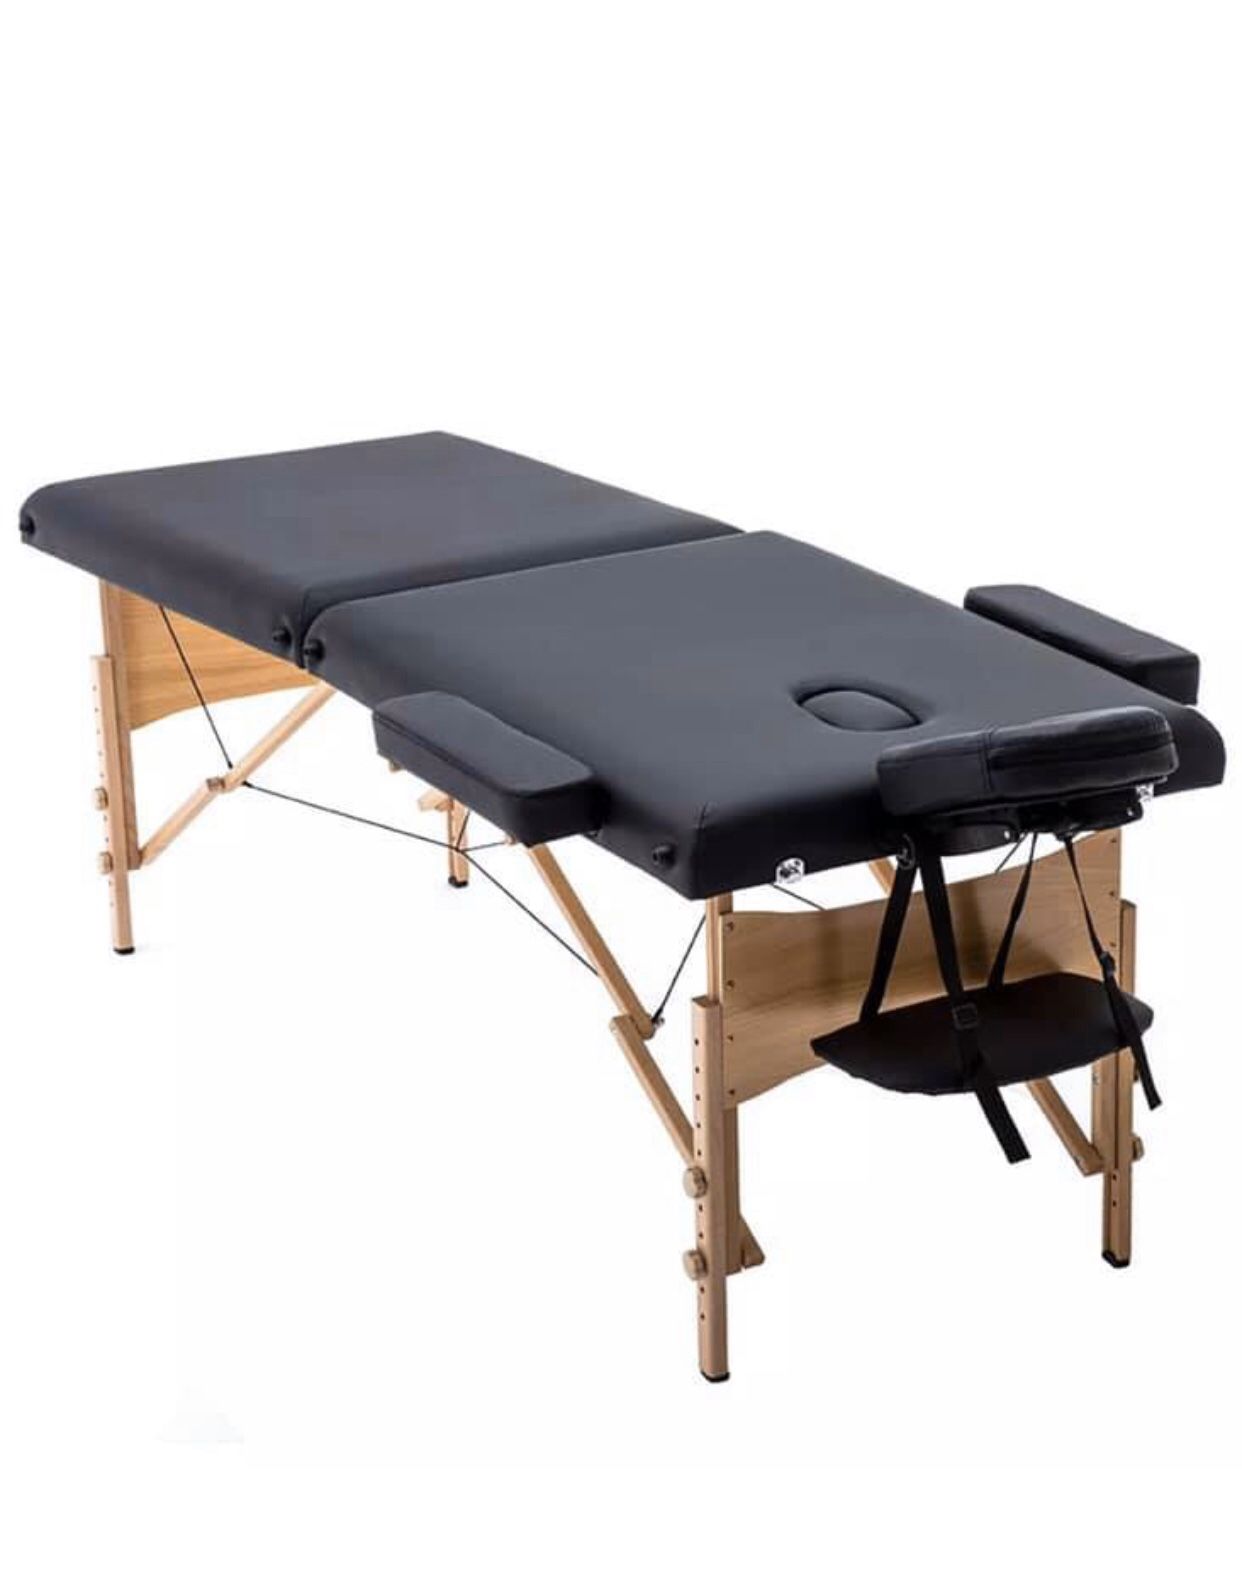 Massage Table FOR SALE Massage Bed Spa Portable 2 Folding w/Carrying Case NEW